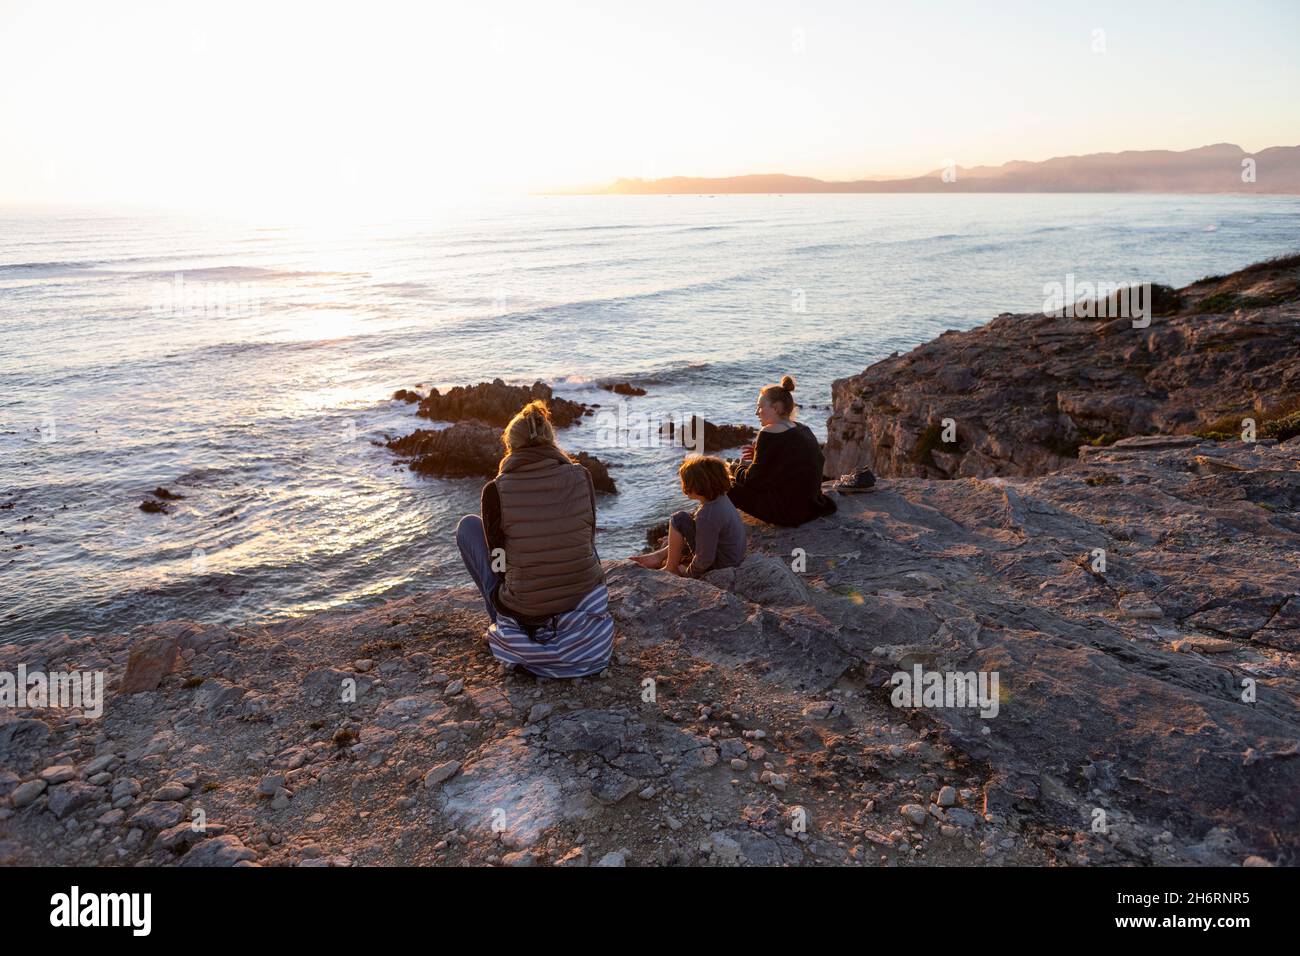 A family, mother and two children sitting watching the sunset over the ocean. Stock Photo